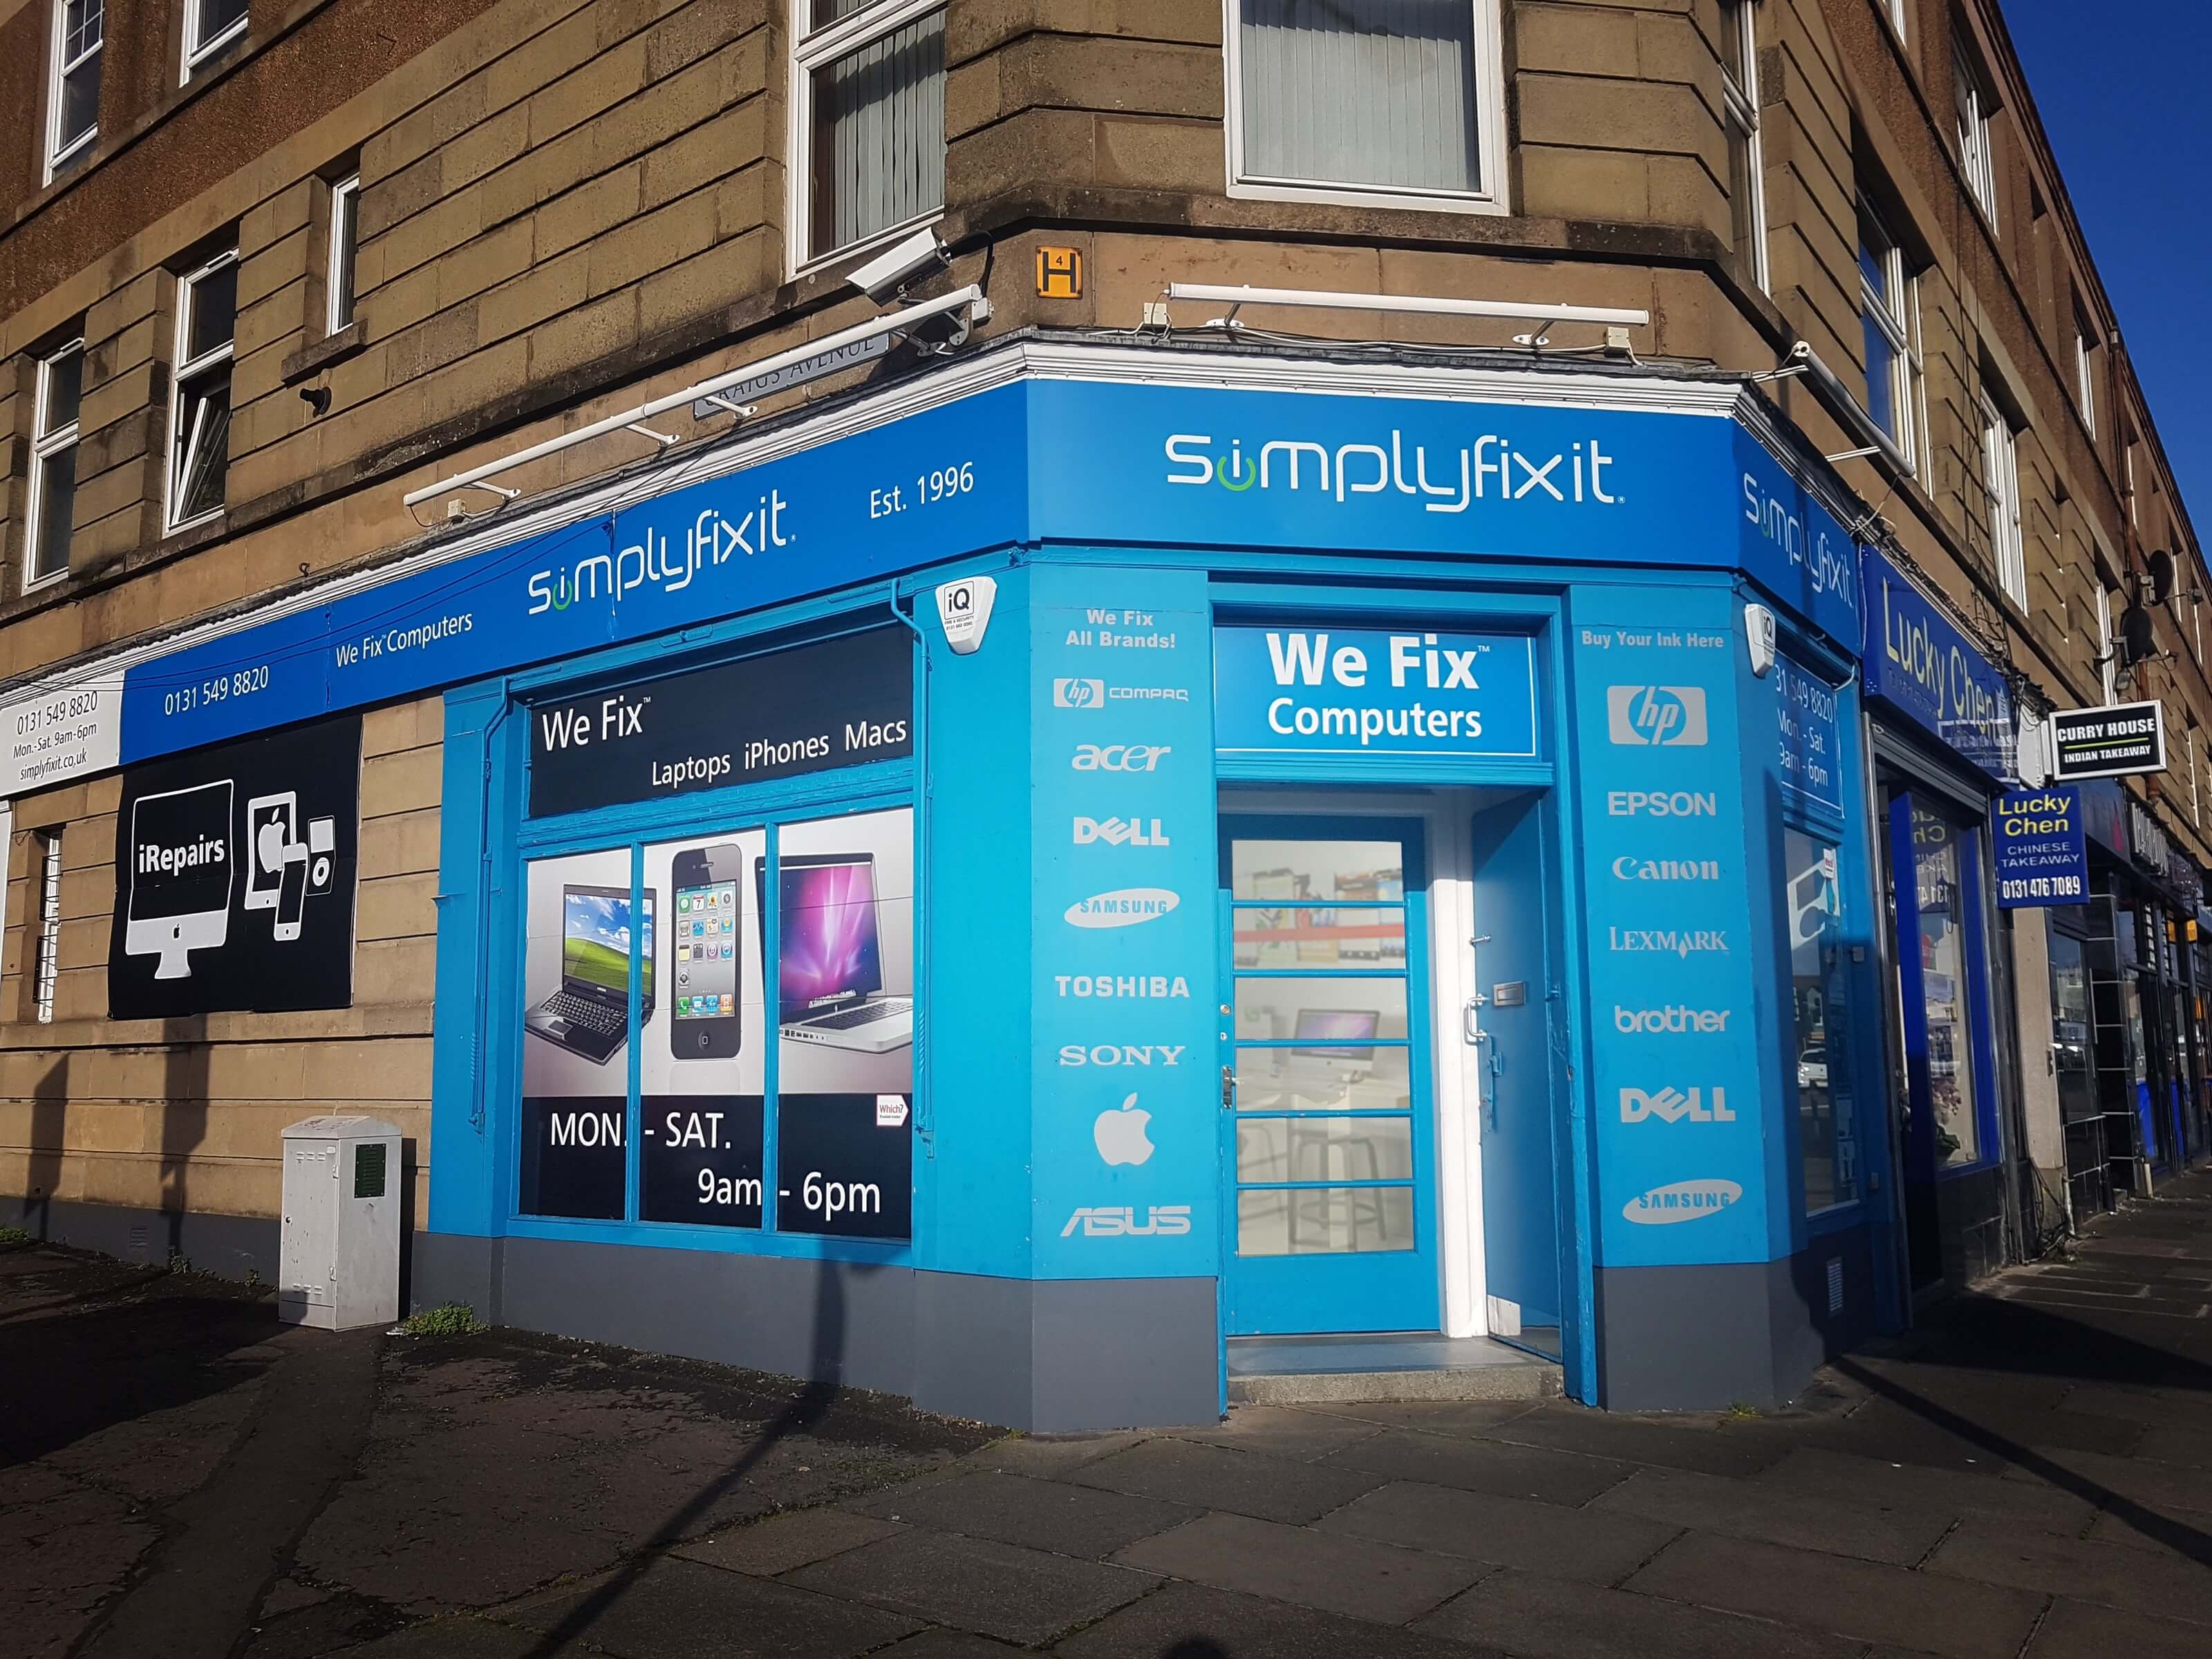 SimplyFixIt at Glasgow Road, Corstorphine.